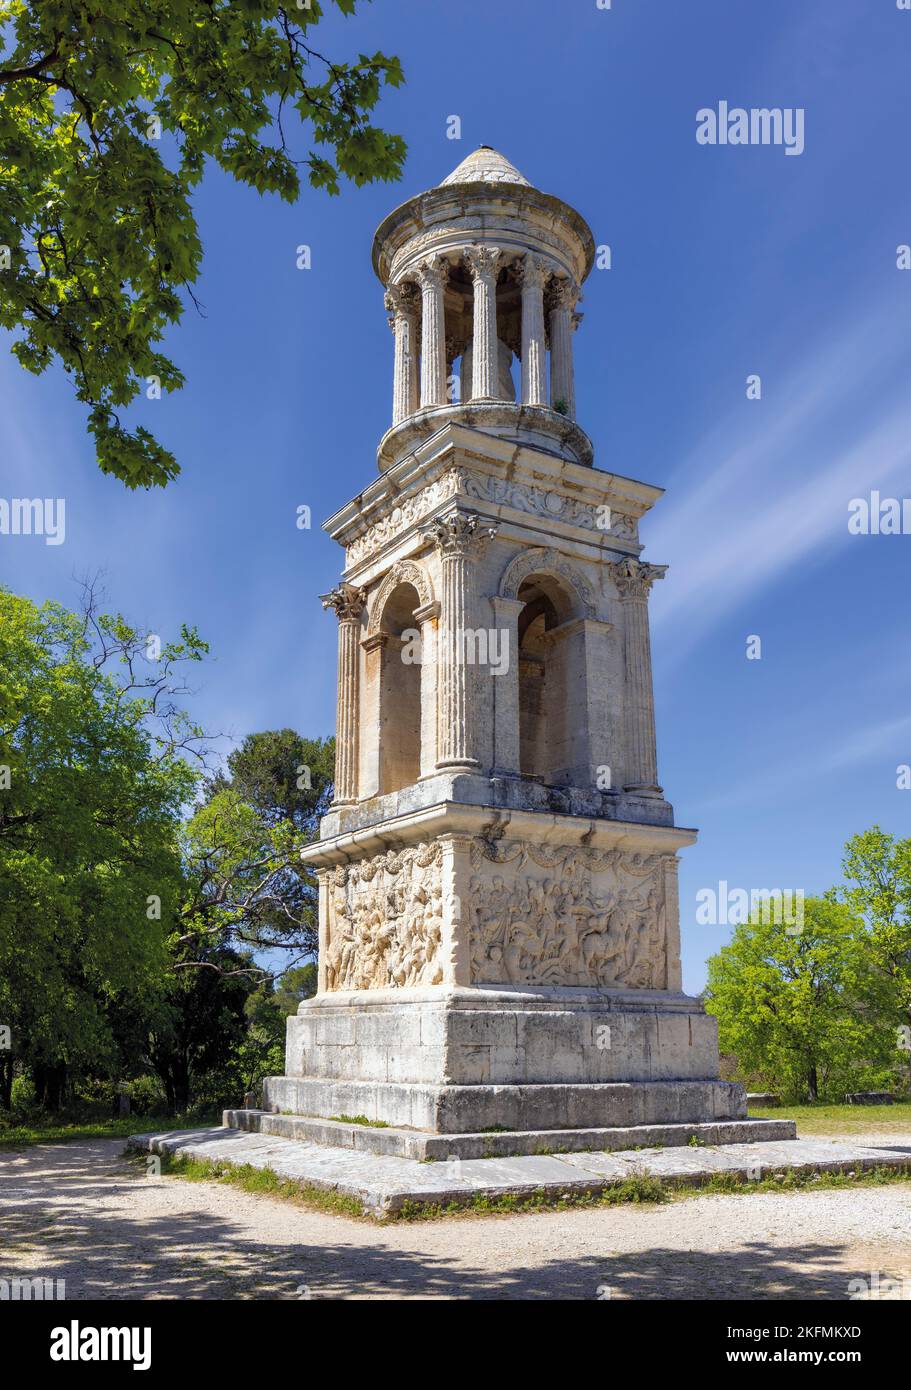 Saint-Rémy-de-Provence, Bouches-du-Rhône, Provence, France.  The mausoleum near the entrance to the Roman city of Glanum.  It is thought to date from Stock Photo